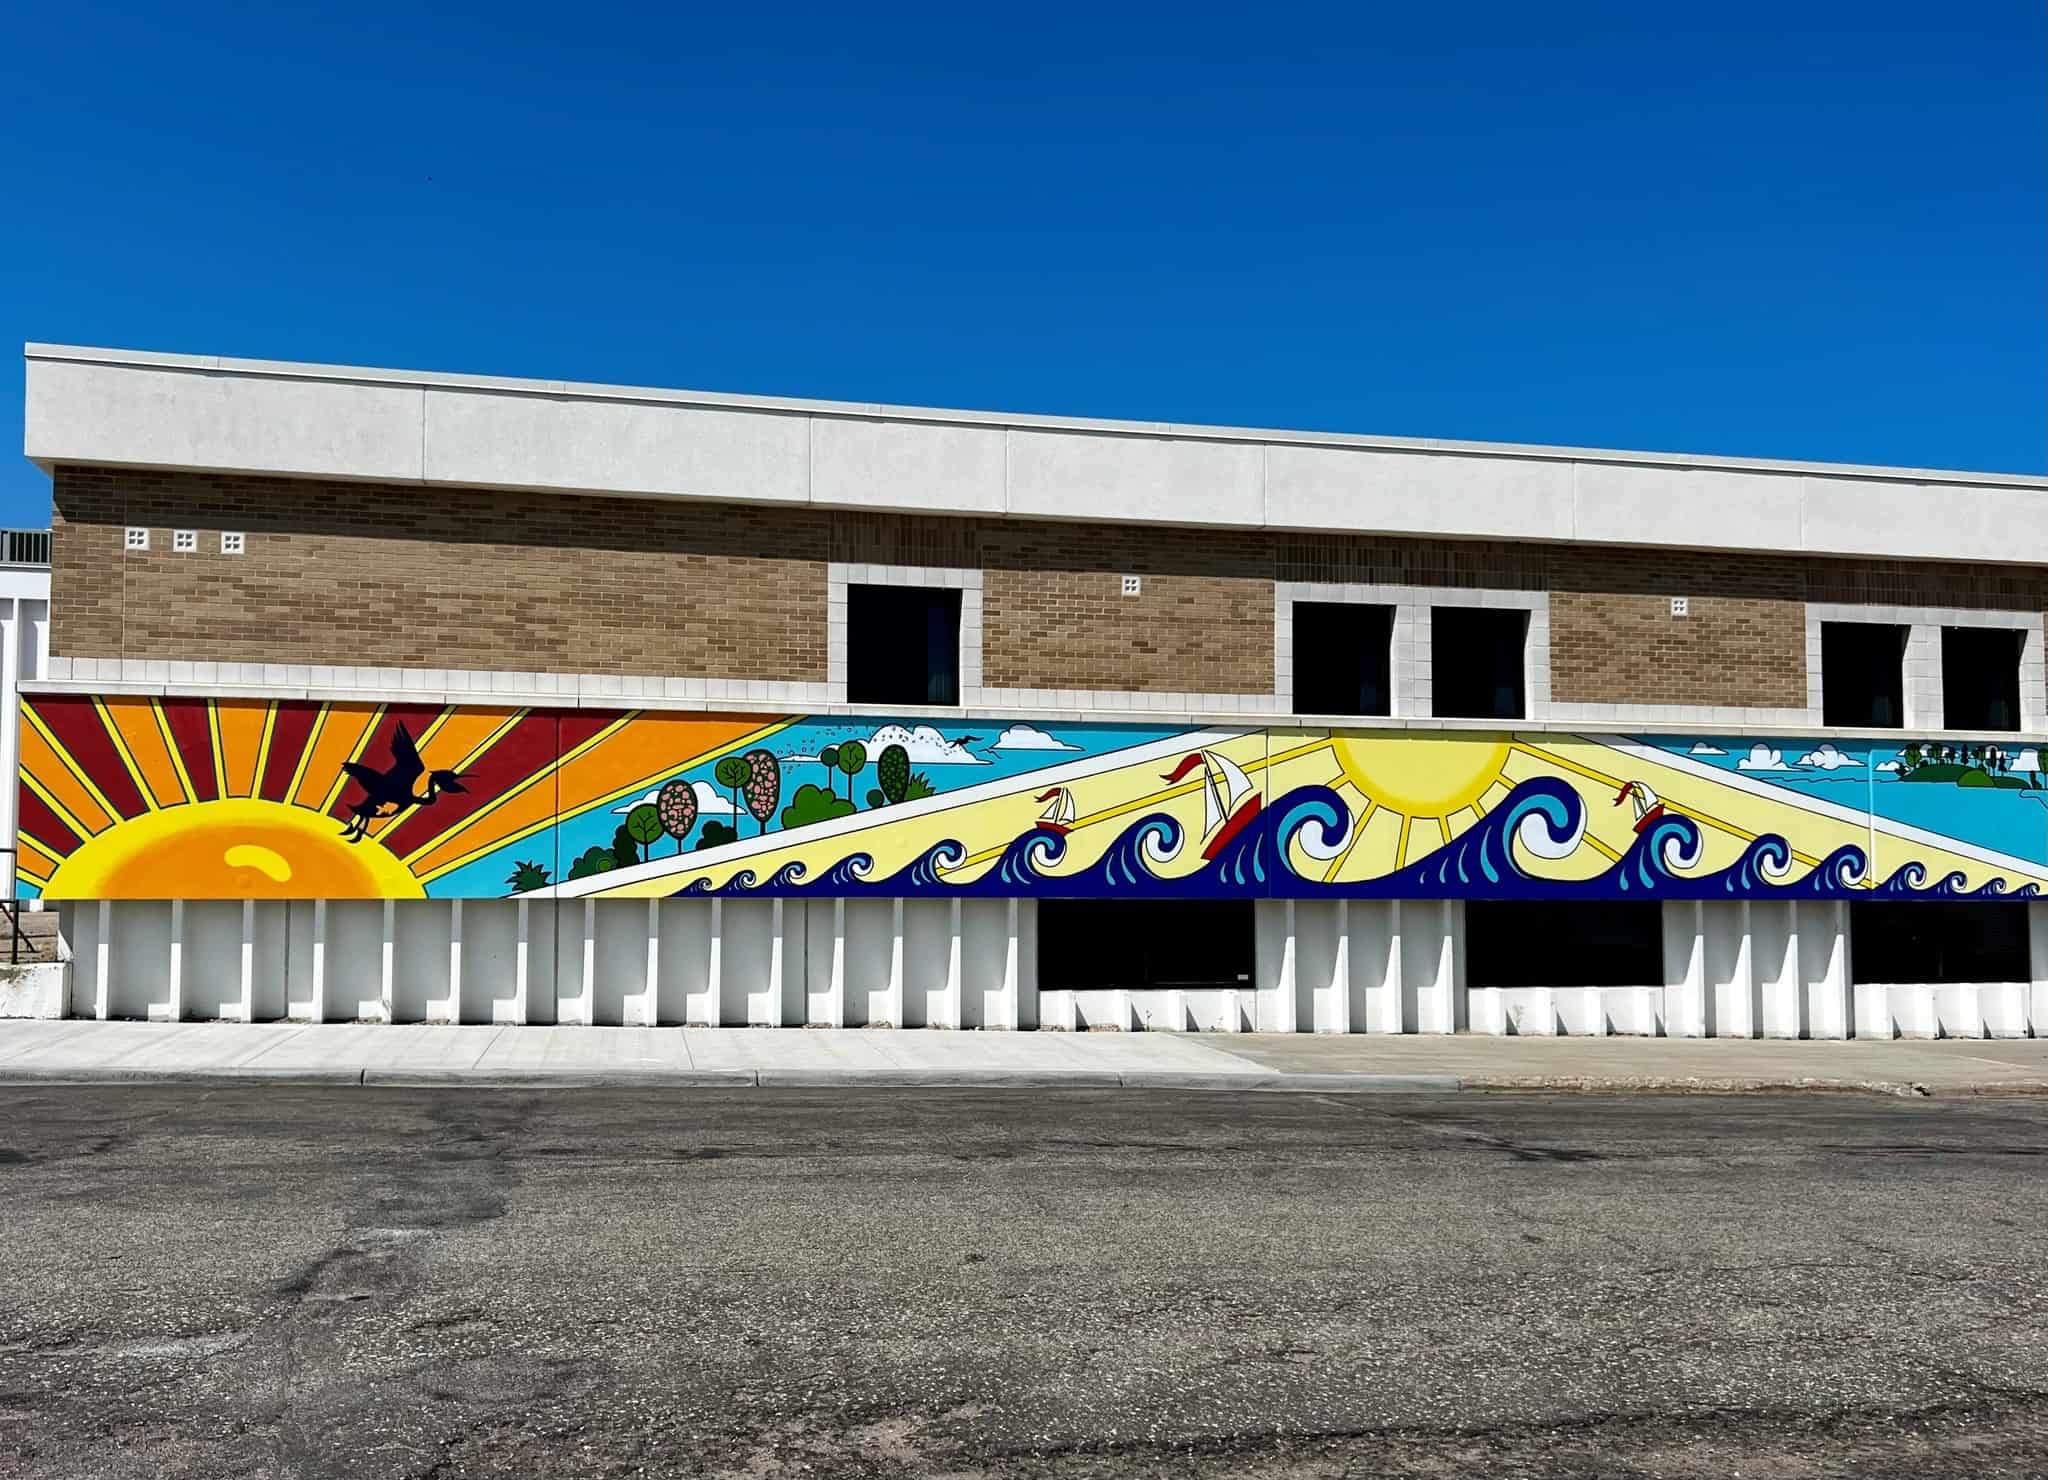 "Embracing Equinox" mural • on the wall of the Becker County Human Services Center building • Artists: Deneena & Sophie Hughes